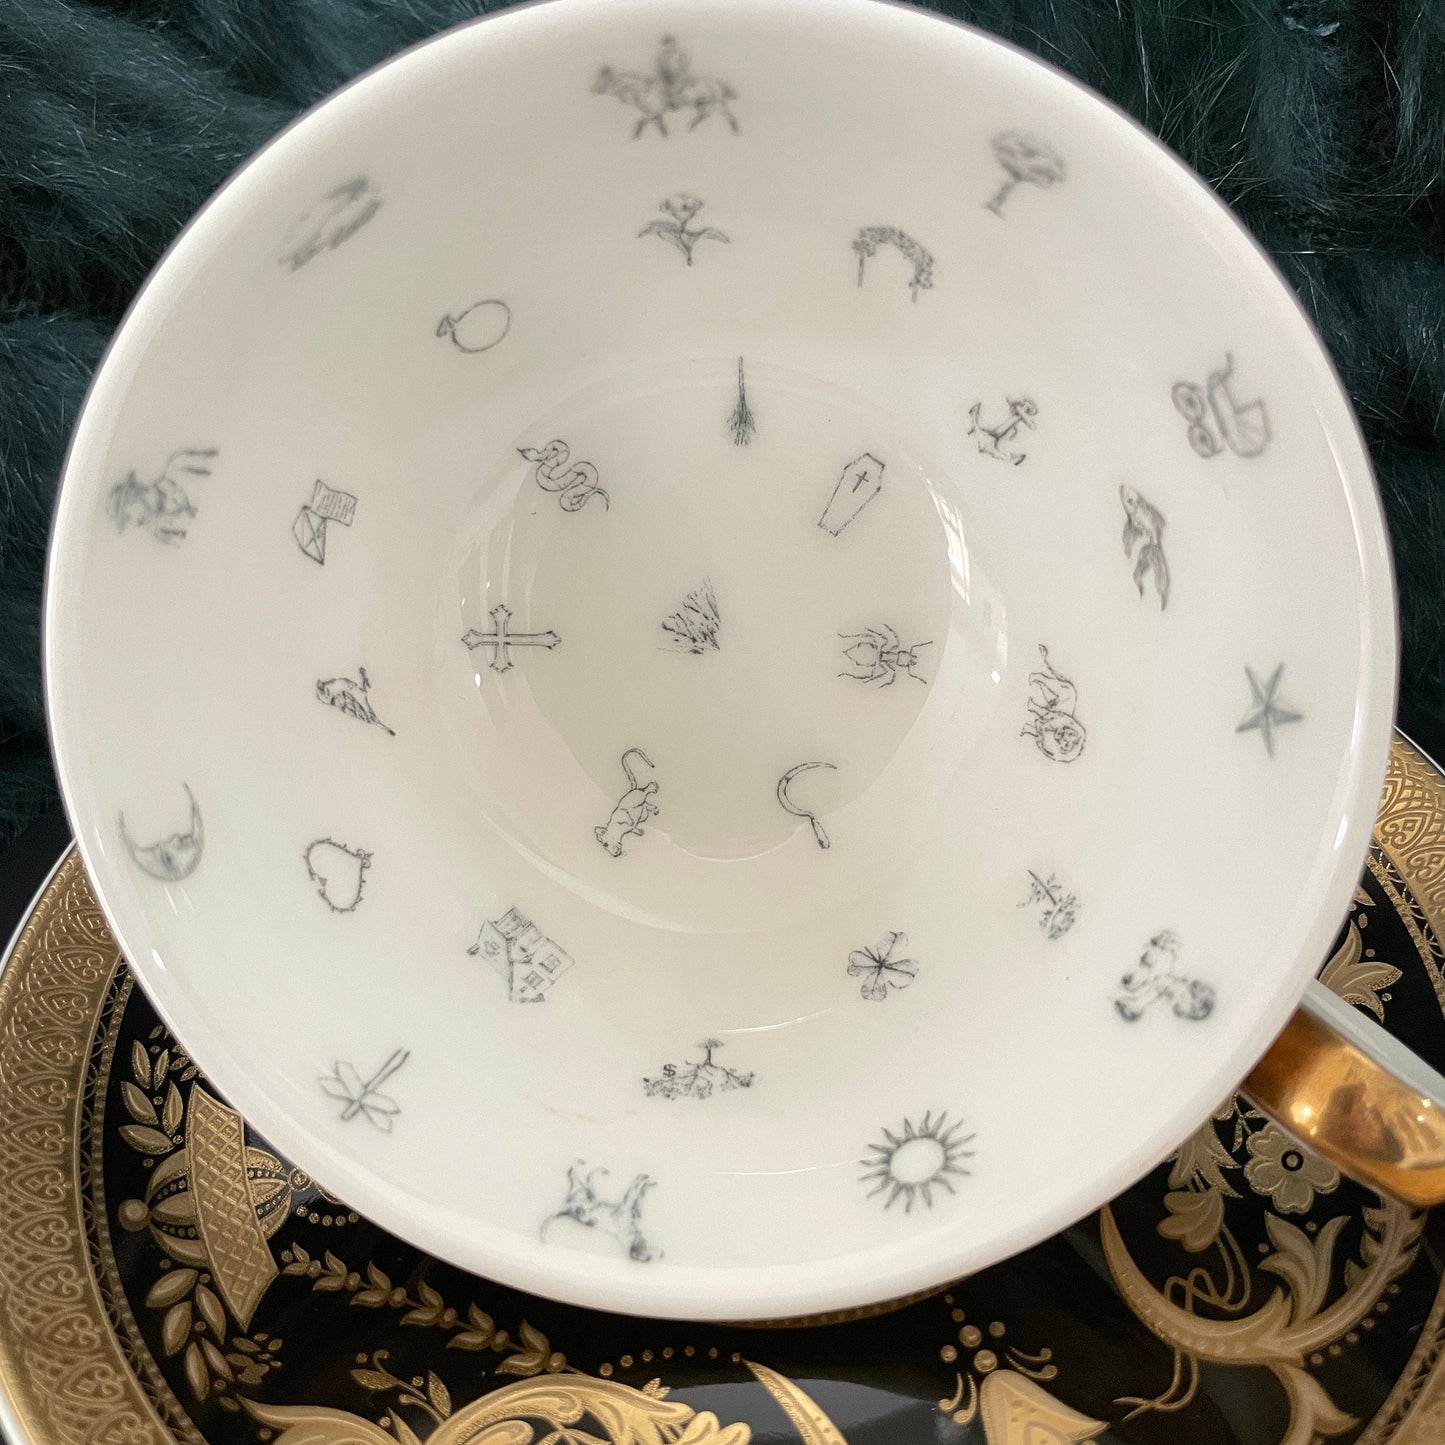 Black and embossed real gold tea cup and saucer set. Tea cup and saucer set. FREE course on Tea leaf reading. Fortuneteller.